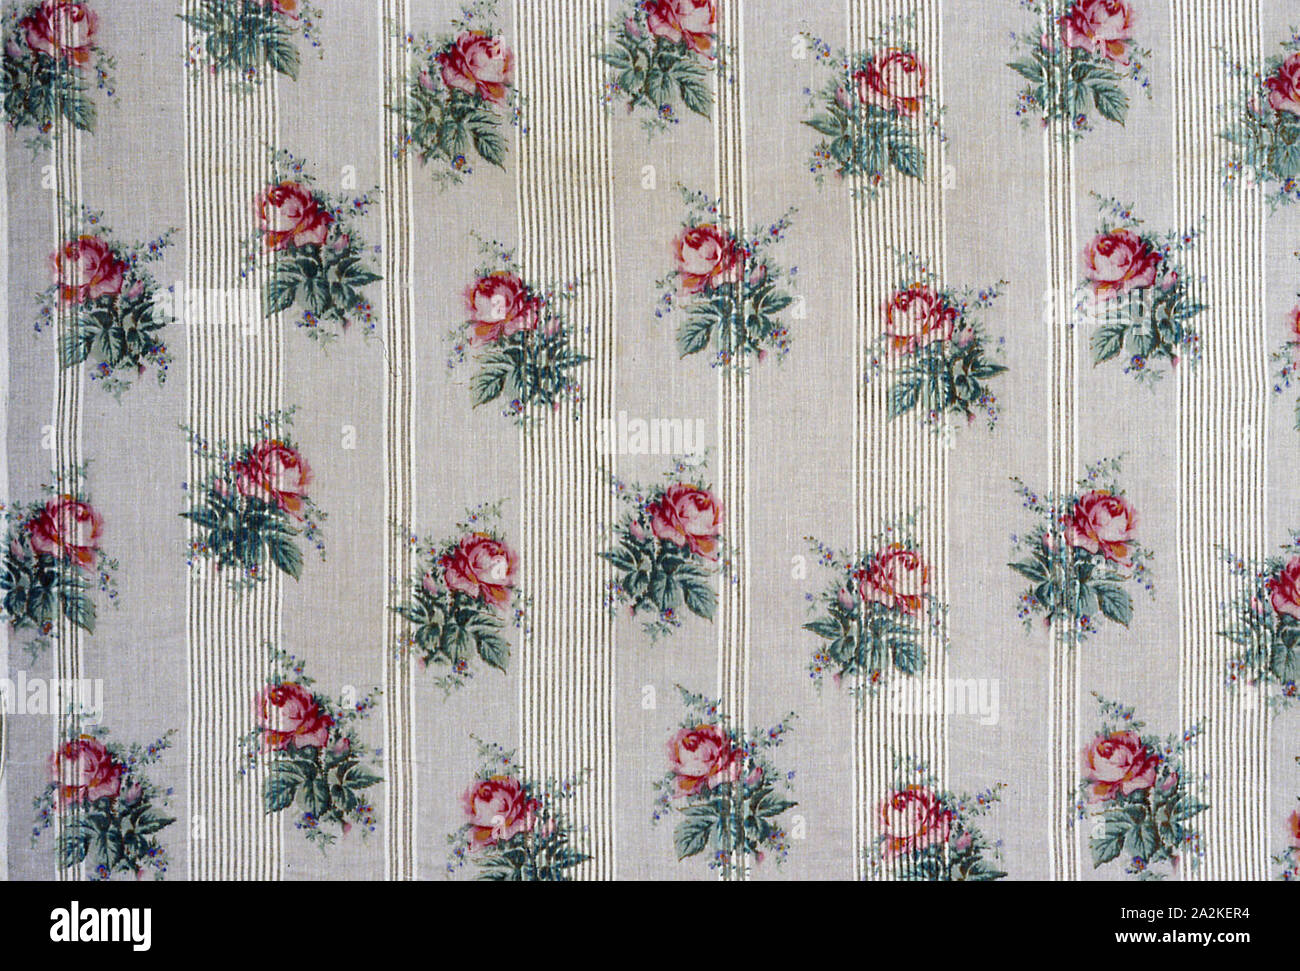 Panel (Dress Fabric), c. 1850, France, Cotton, stripes of plain weave, warp-float faced twill weaves, plain gauze weave, openwork, roller printed, 113.0 × 81.9 cm (44 1/2 × 33 1/4 in Stock Photo